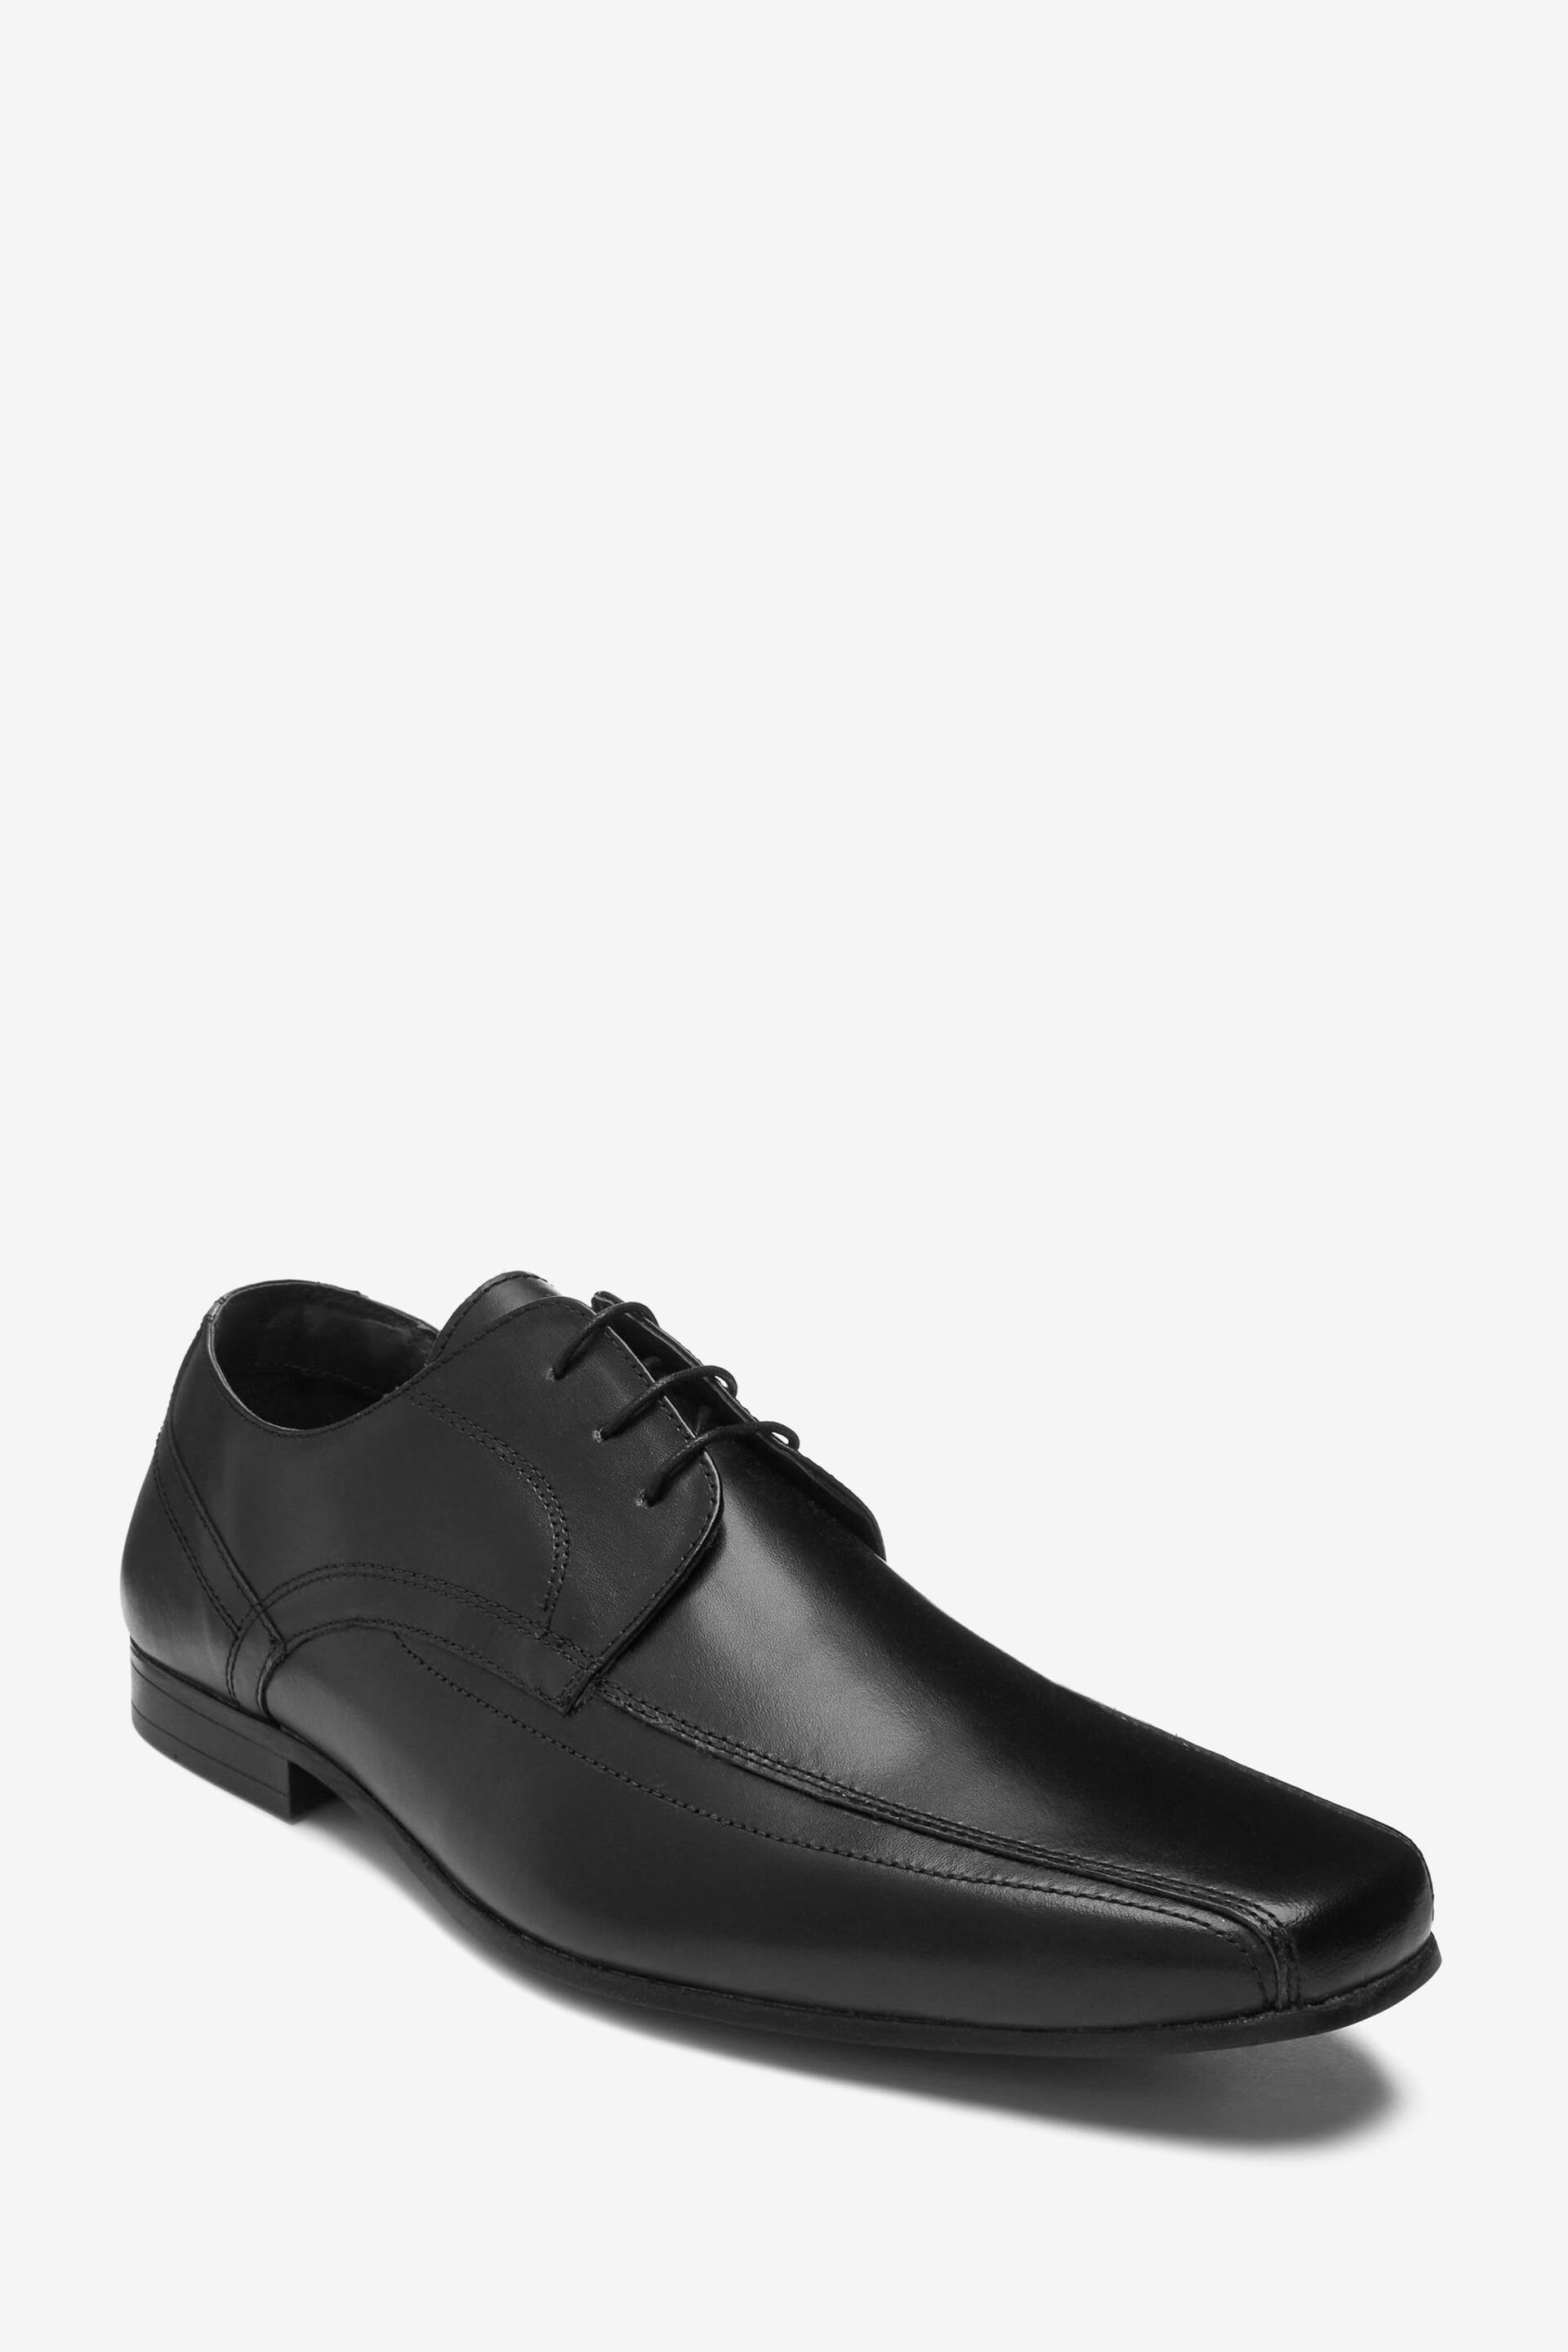 Black Leather Panel Lace-Up Shoes - Image 2 of 4